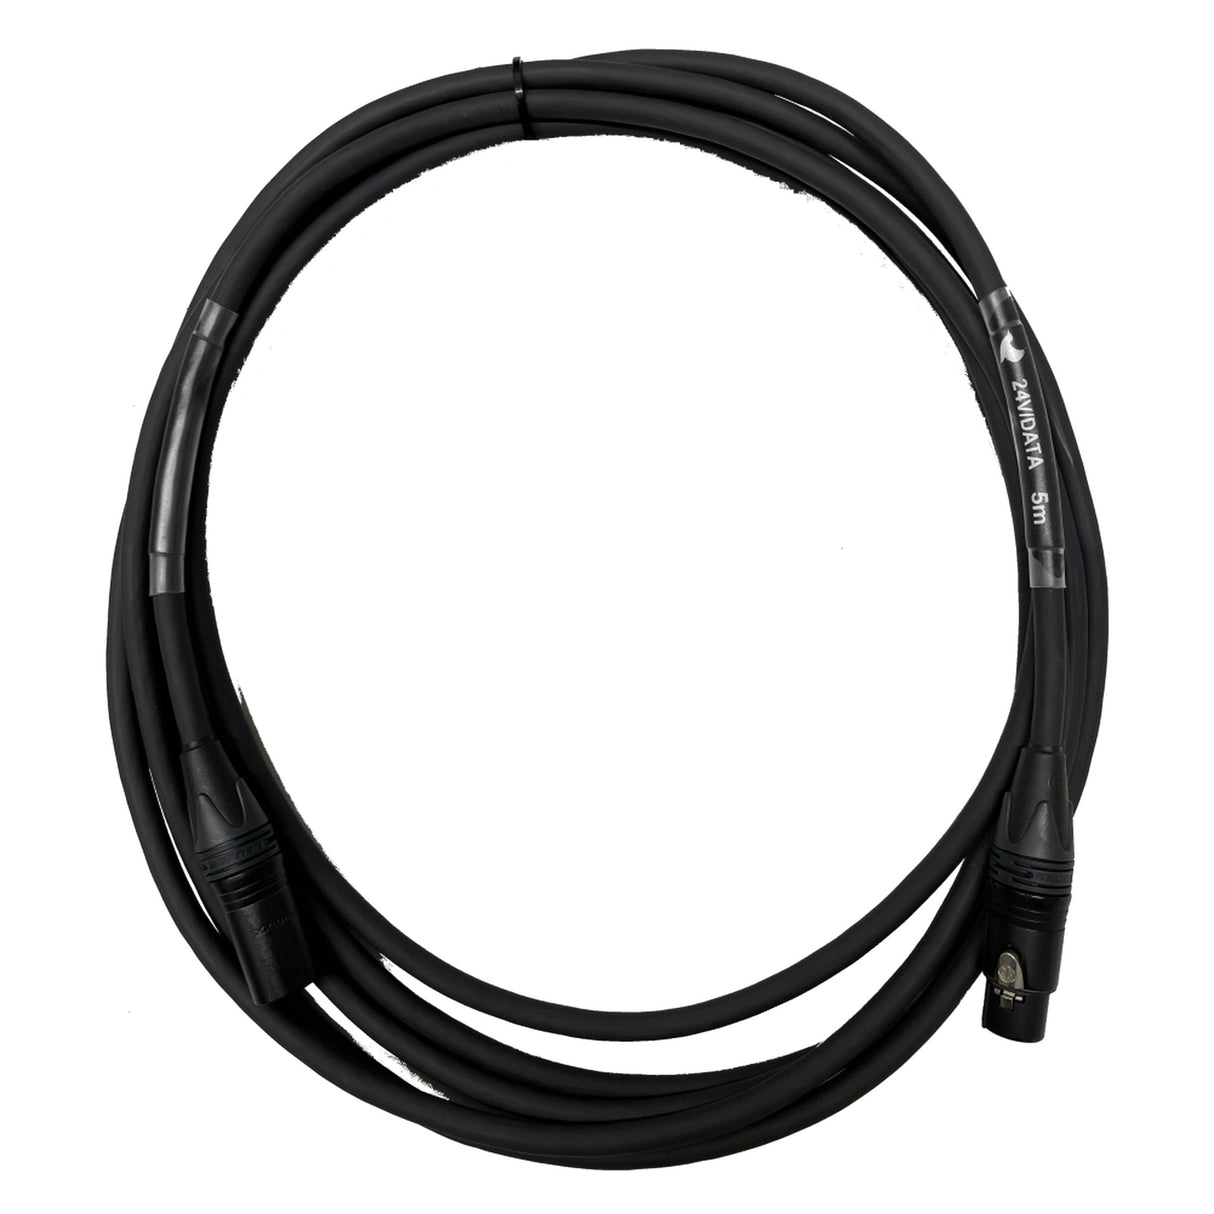 Waterbird 4-Pin XLR Power Data Cable for MS PRO/MS Swift/MS XL, 5-Meters